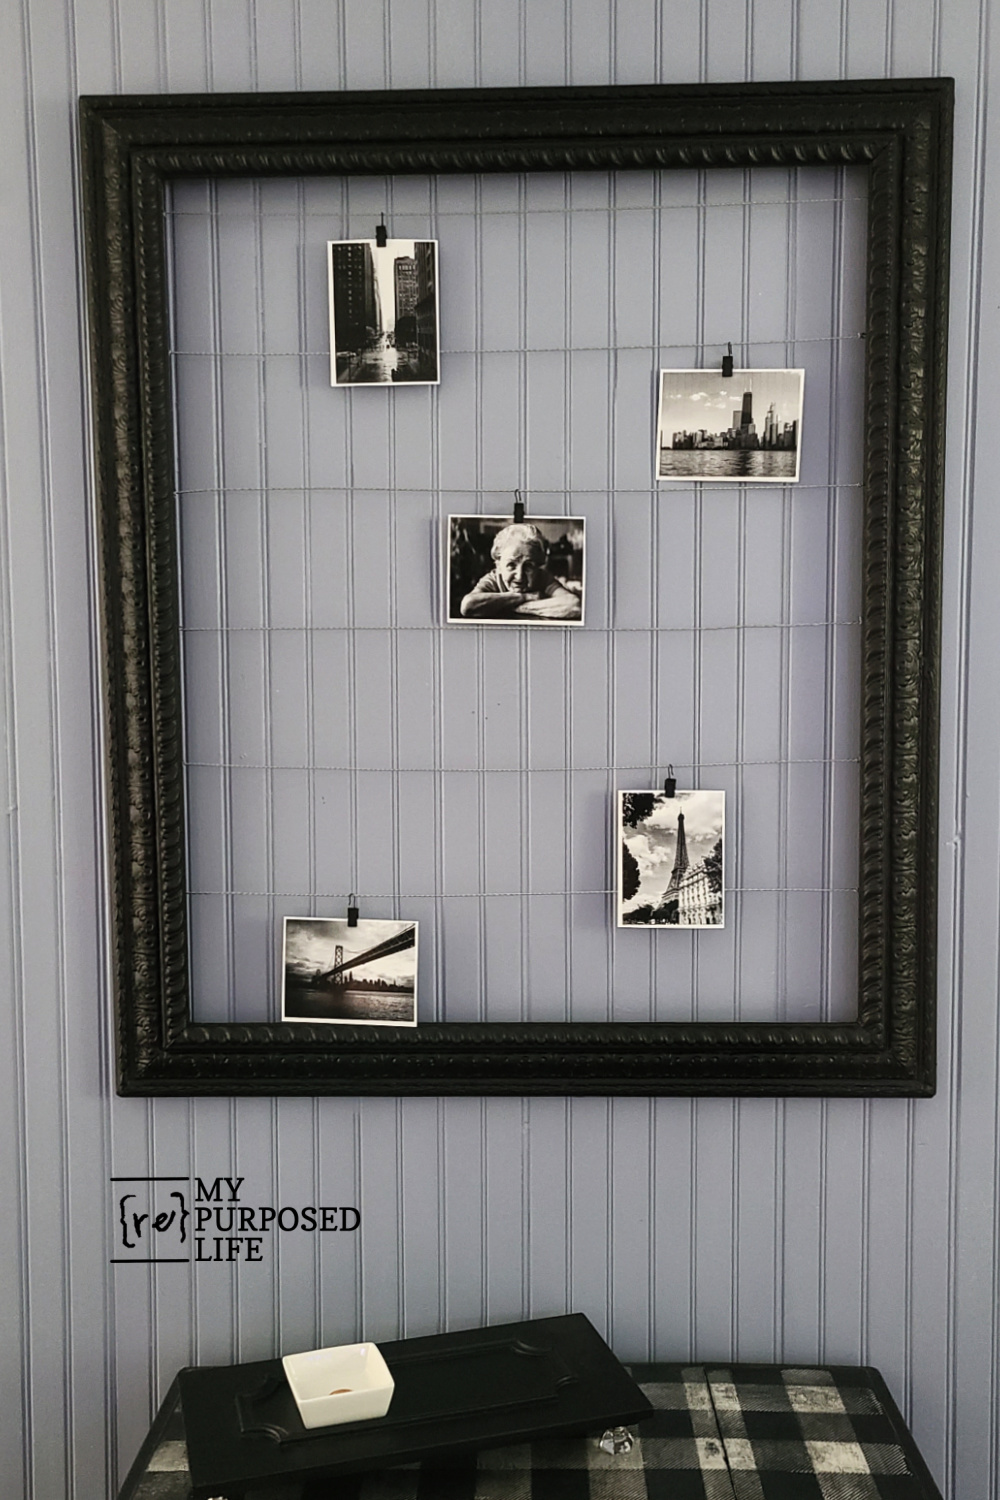 How to turn a repurposed thrift store art frame into a fun and useful photo display project. Step by step directions and tips to make it an easy afternoon project. #MyRepurposedLife #repurposed #frame #thriftstore #photodisplay #project #diy via @repurposedlife